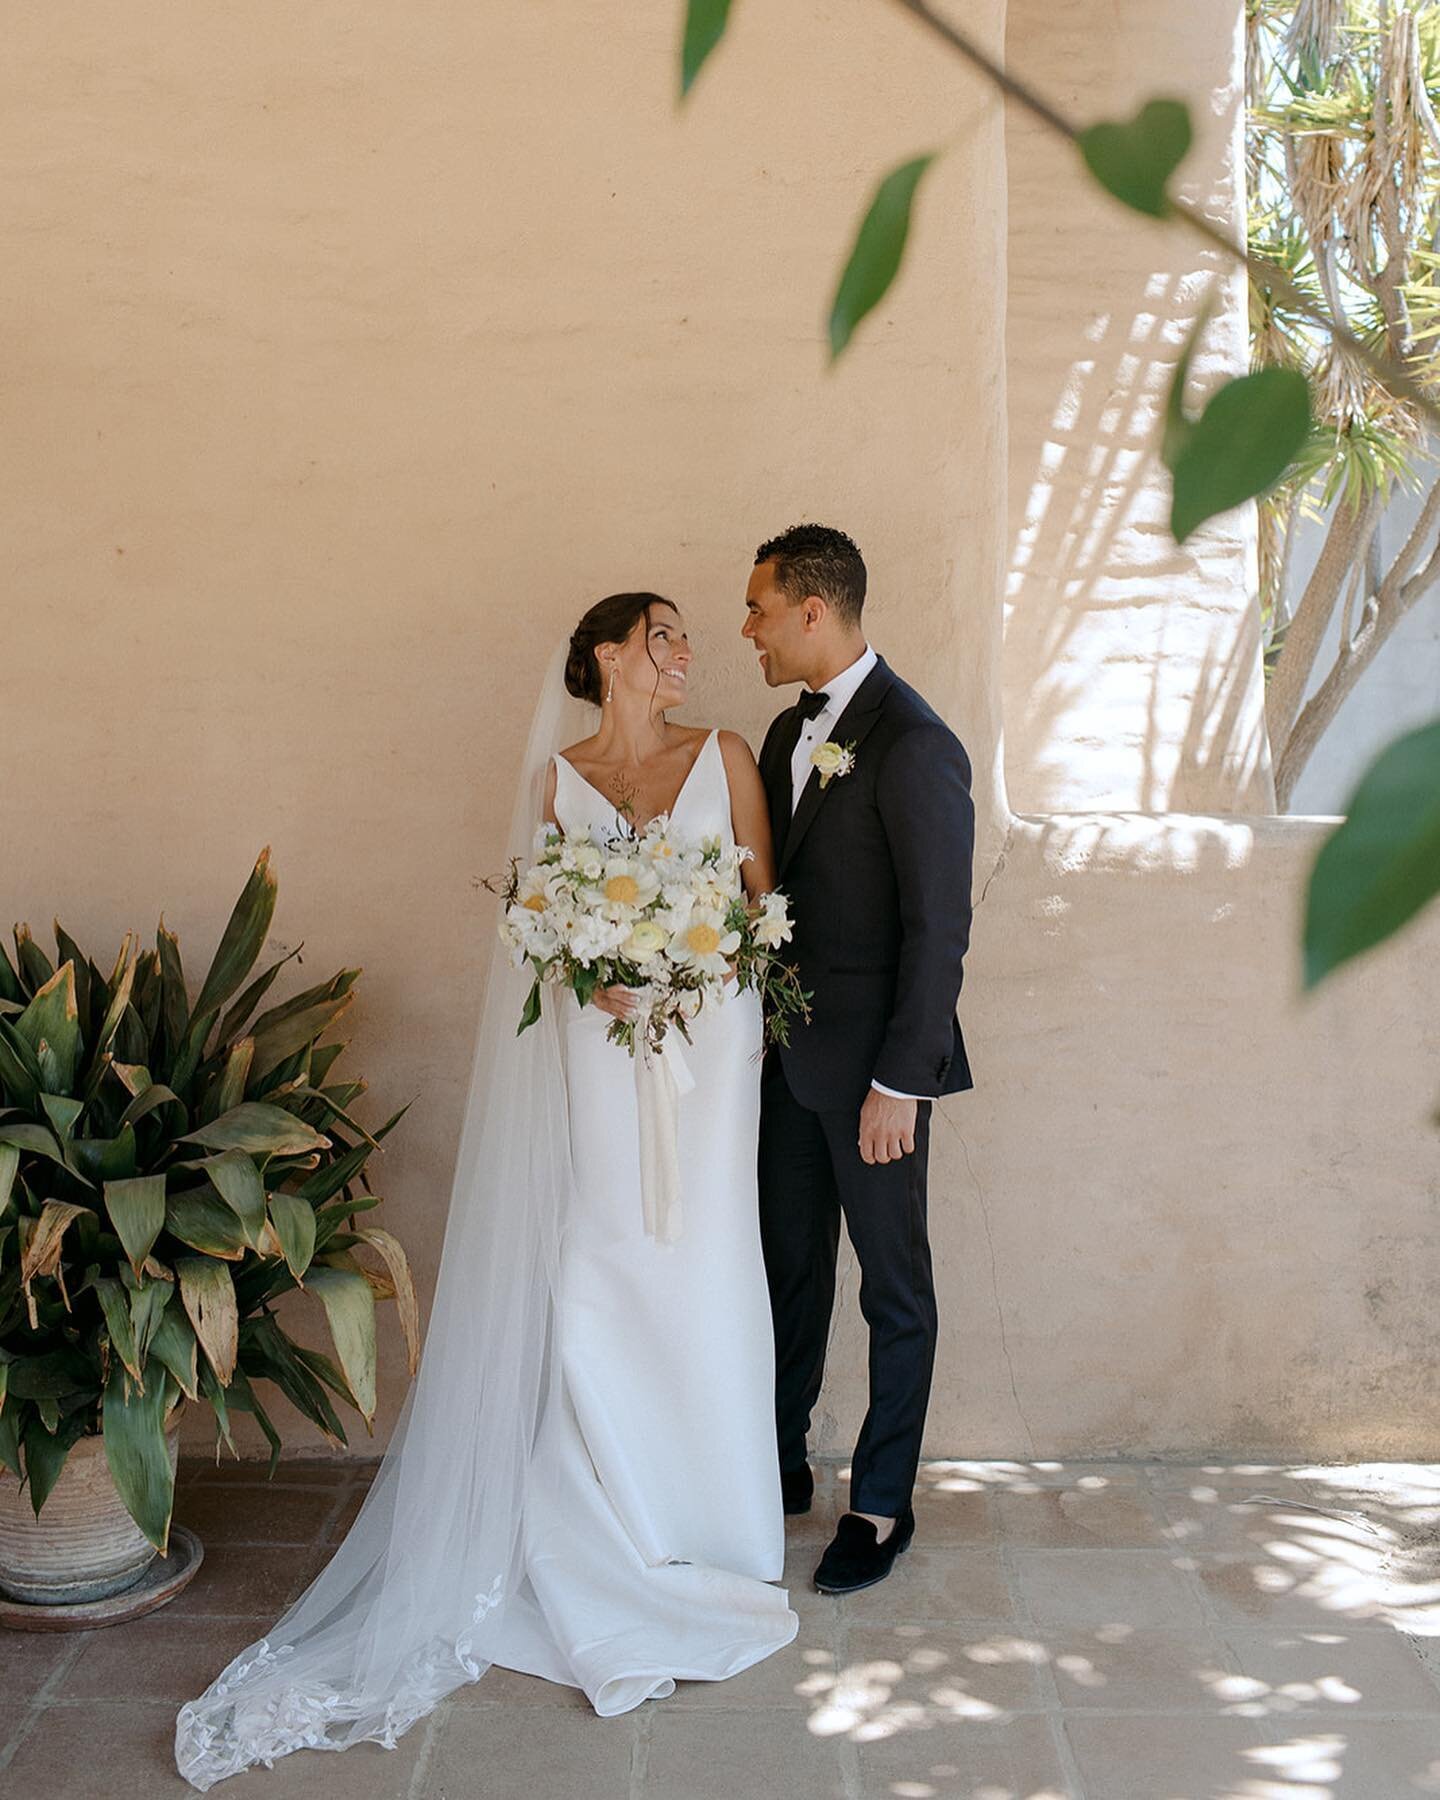 Happy May! Can&rsquo;t help but look back on this very special weekend for Ariana &amp; John at @sbhistoricalmuseum . 

Captured @alibeckphoto 
Florals @knotjustflowers 
Production @freschevents 

#springwedding #maywedding #santabarbaraweddingplanne